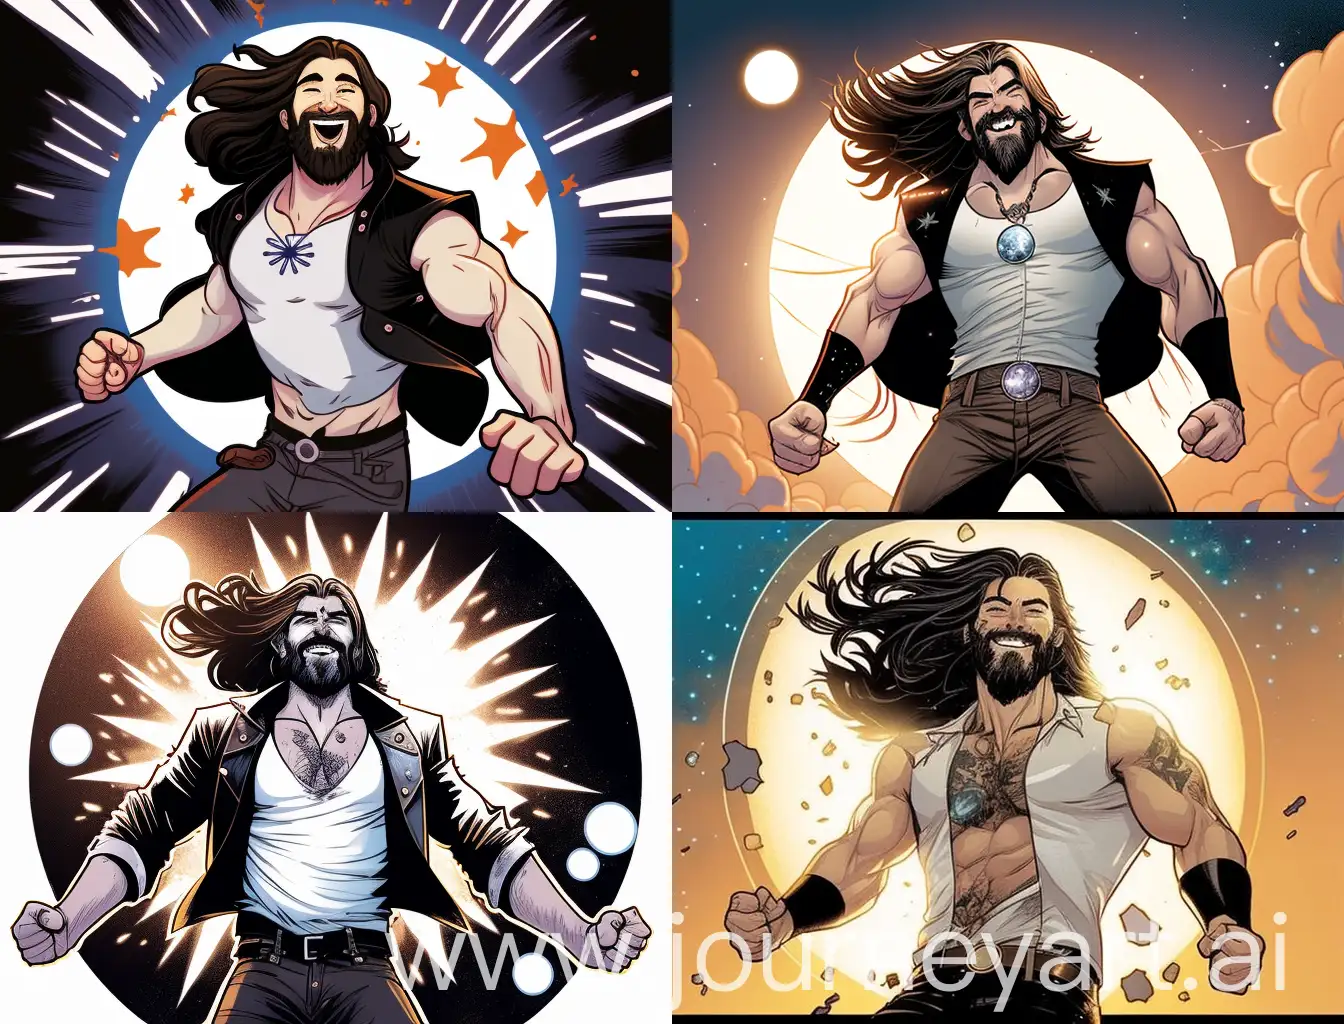 marvel comics style muscular man with a beard and long hair that reaches his back he is smiling peacefully in a leather jacket white tank top black pants and black boots he has a medallion on his waist and is flying over a comet shower in outer space